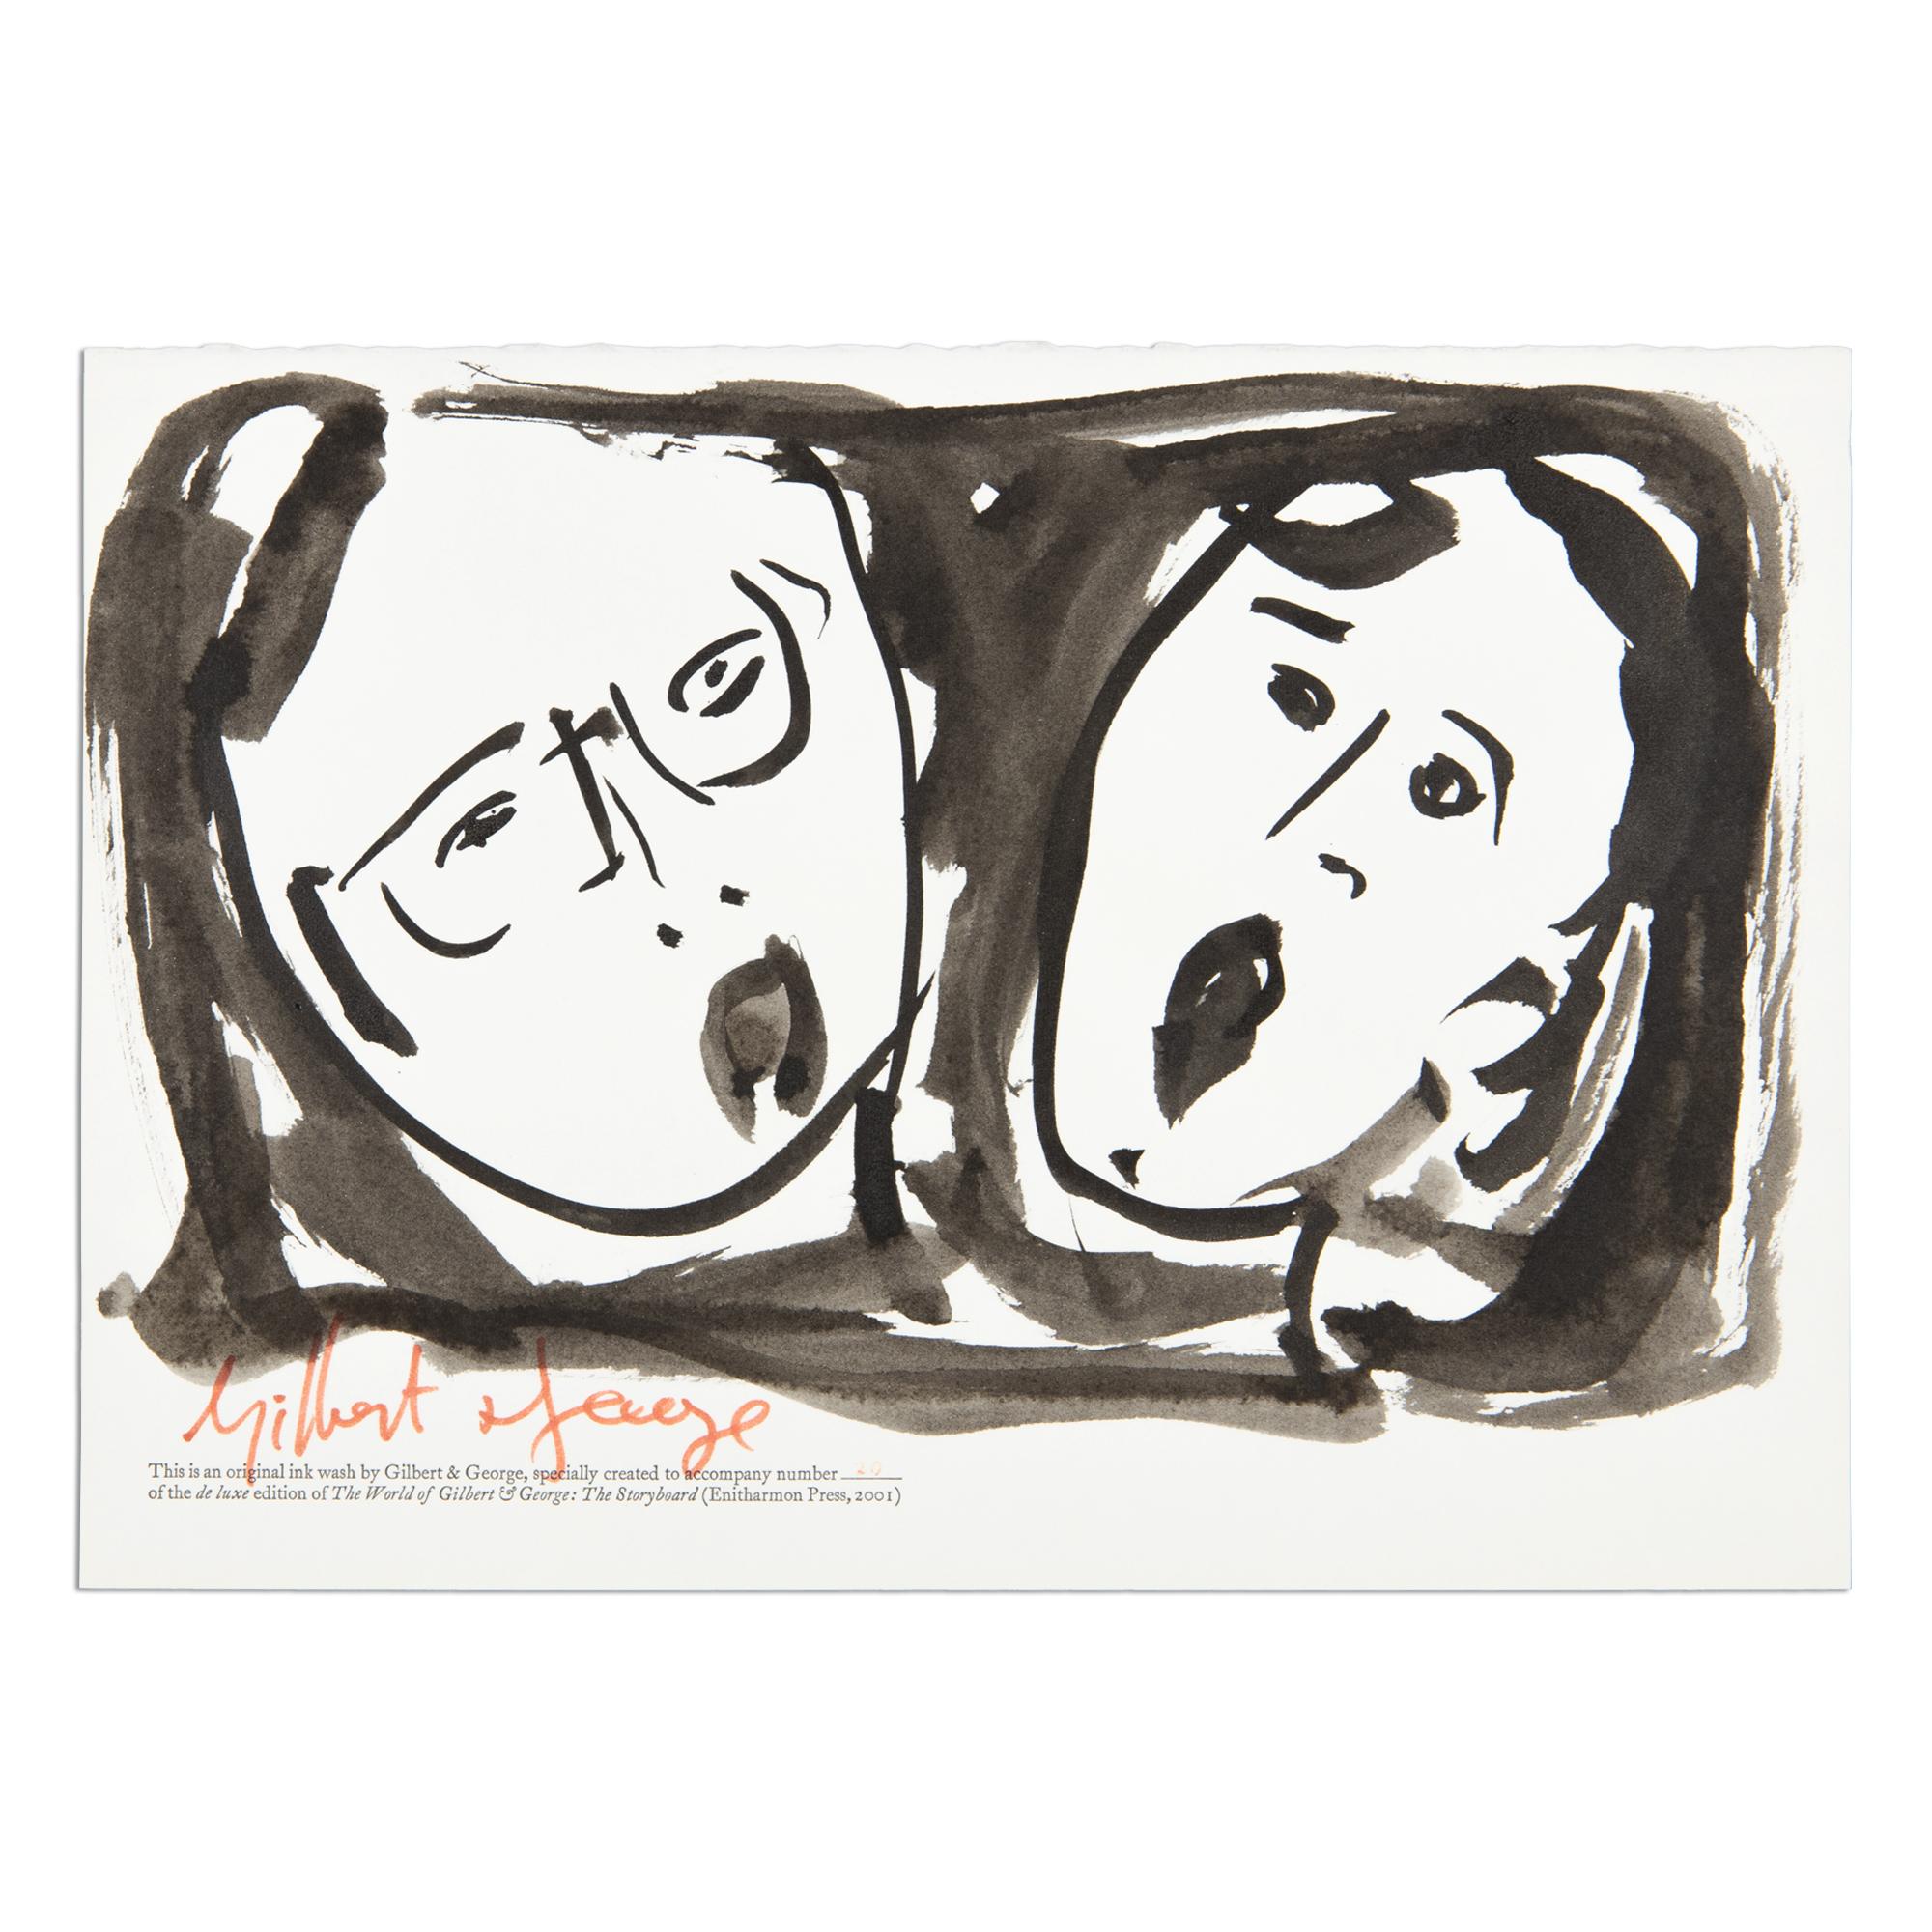 Gilbert & George (British, b. 1942 and 1943)
The World of Gilbert & George: The Storyboard, 2001
Medium: Ink wash drawing on paper (and artist’s book)
Dimensions: 20.3 x 29.2 cm (8 x 11½ in)
Deluxe edition of 150: Unique hand-signed and numbered